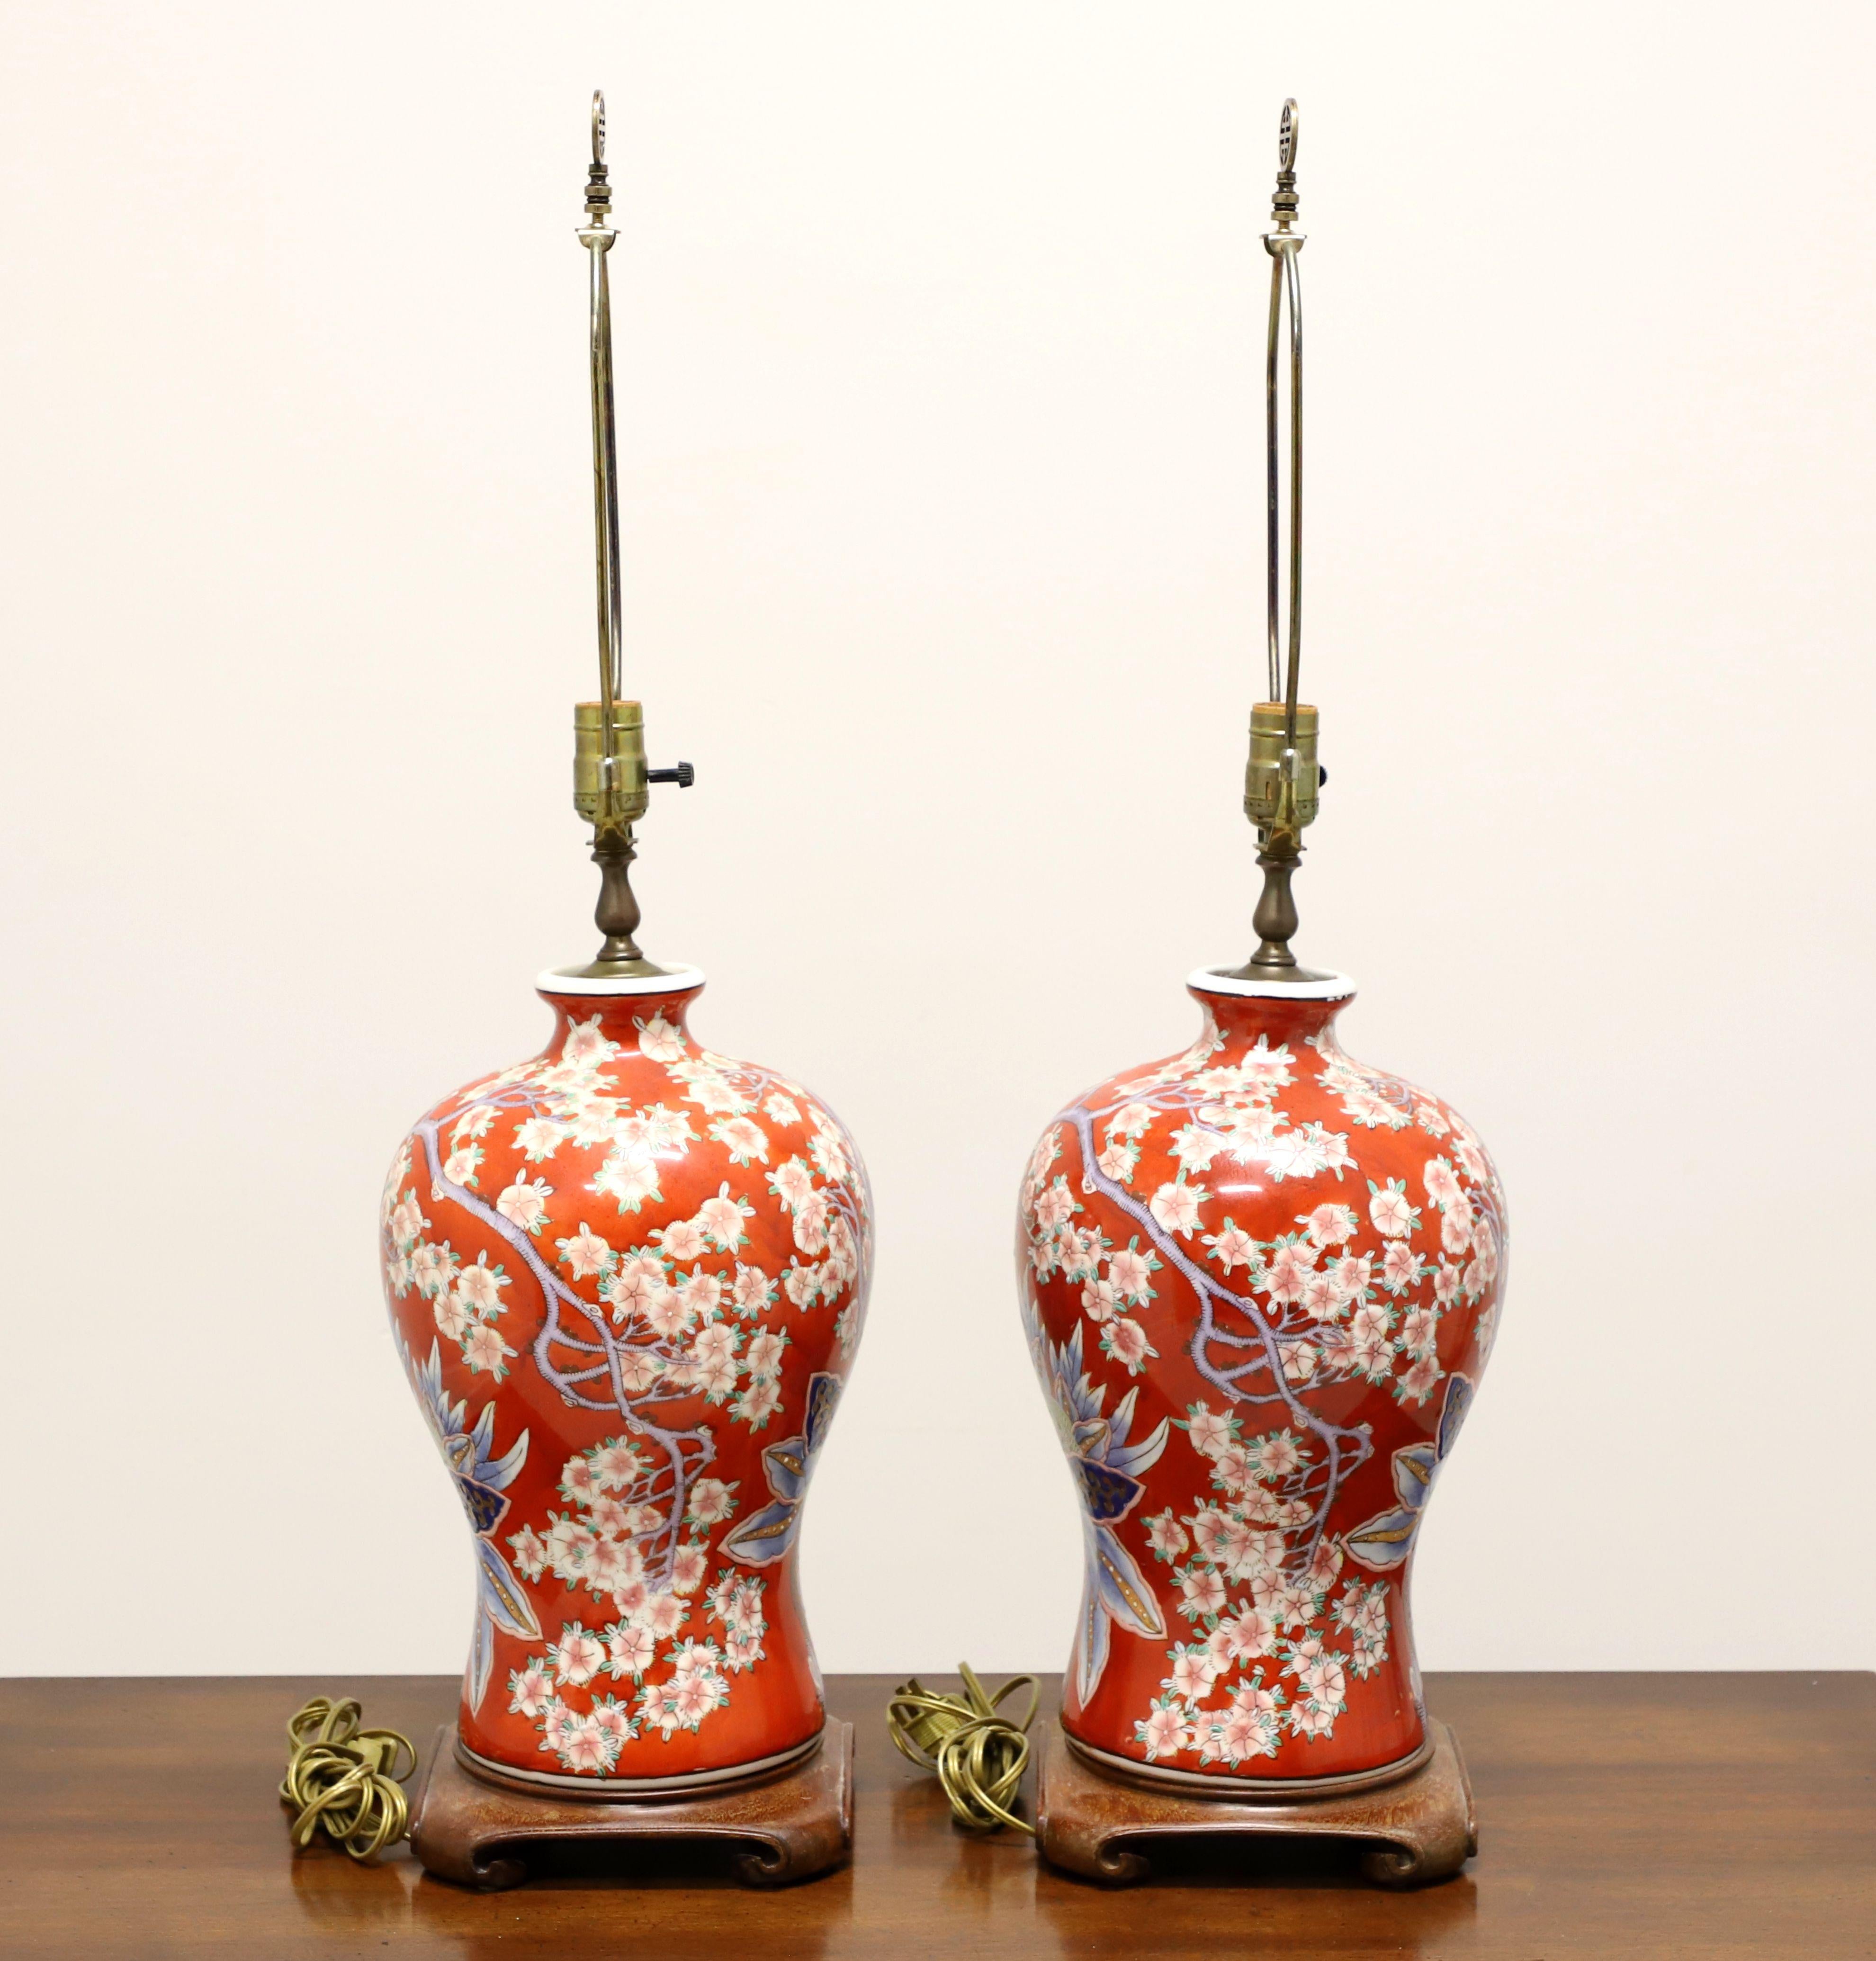 A pair of Asian Chinoiserie style table lamps, unbranded. Made of porcelain in an urn style, hand painted, with a red base color, pink & white cherry blossoms, blue, green & brown floral accents, and on a carved wood base. Has a metal harp and